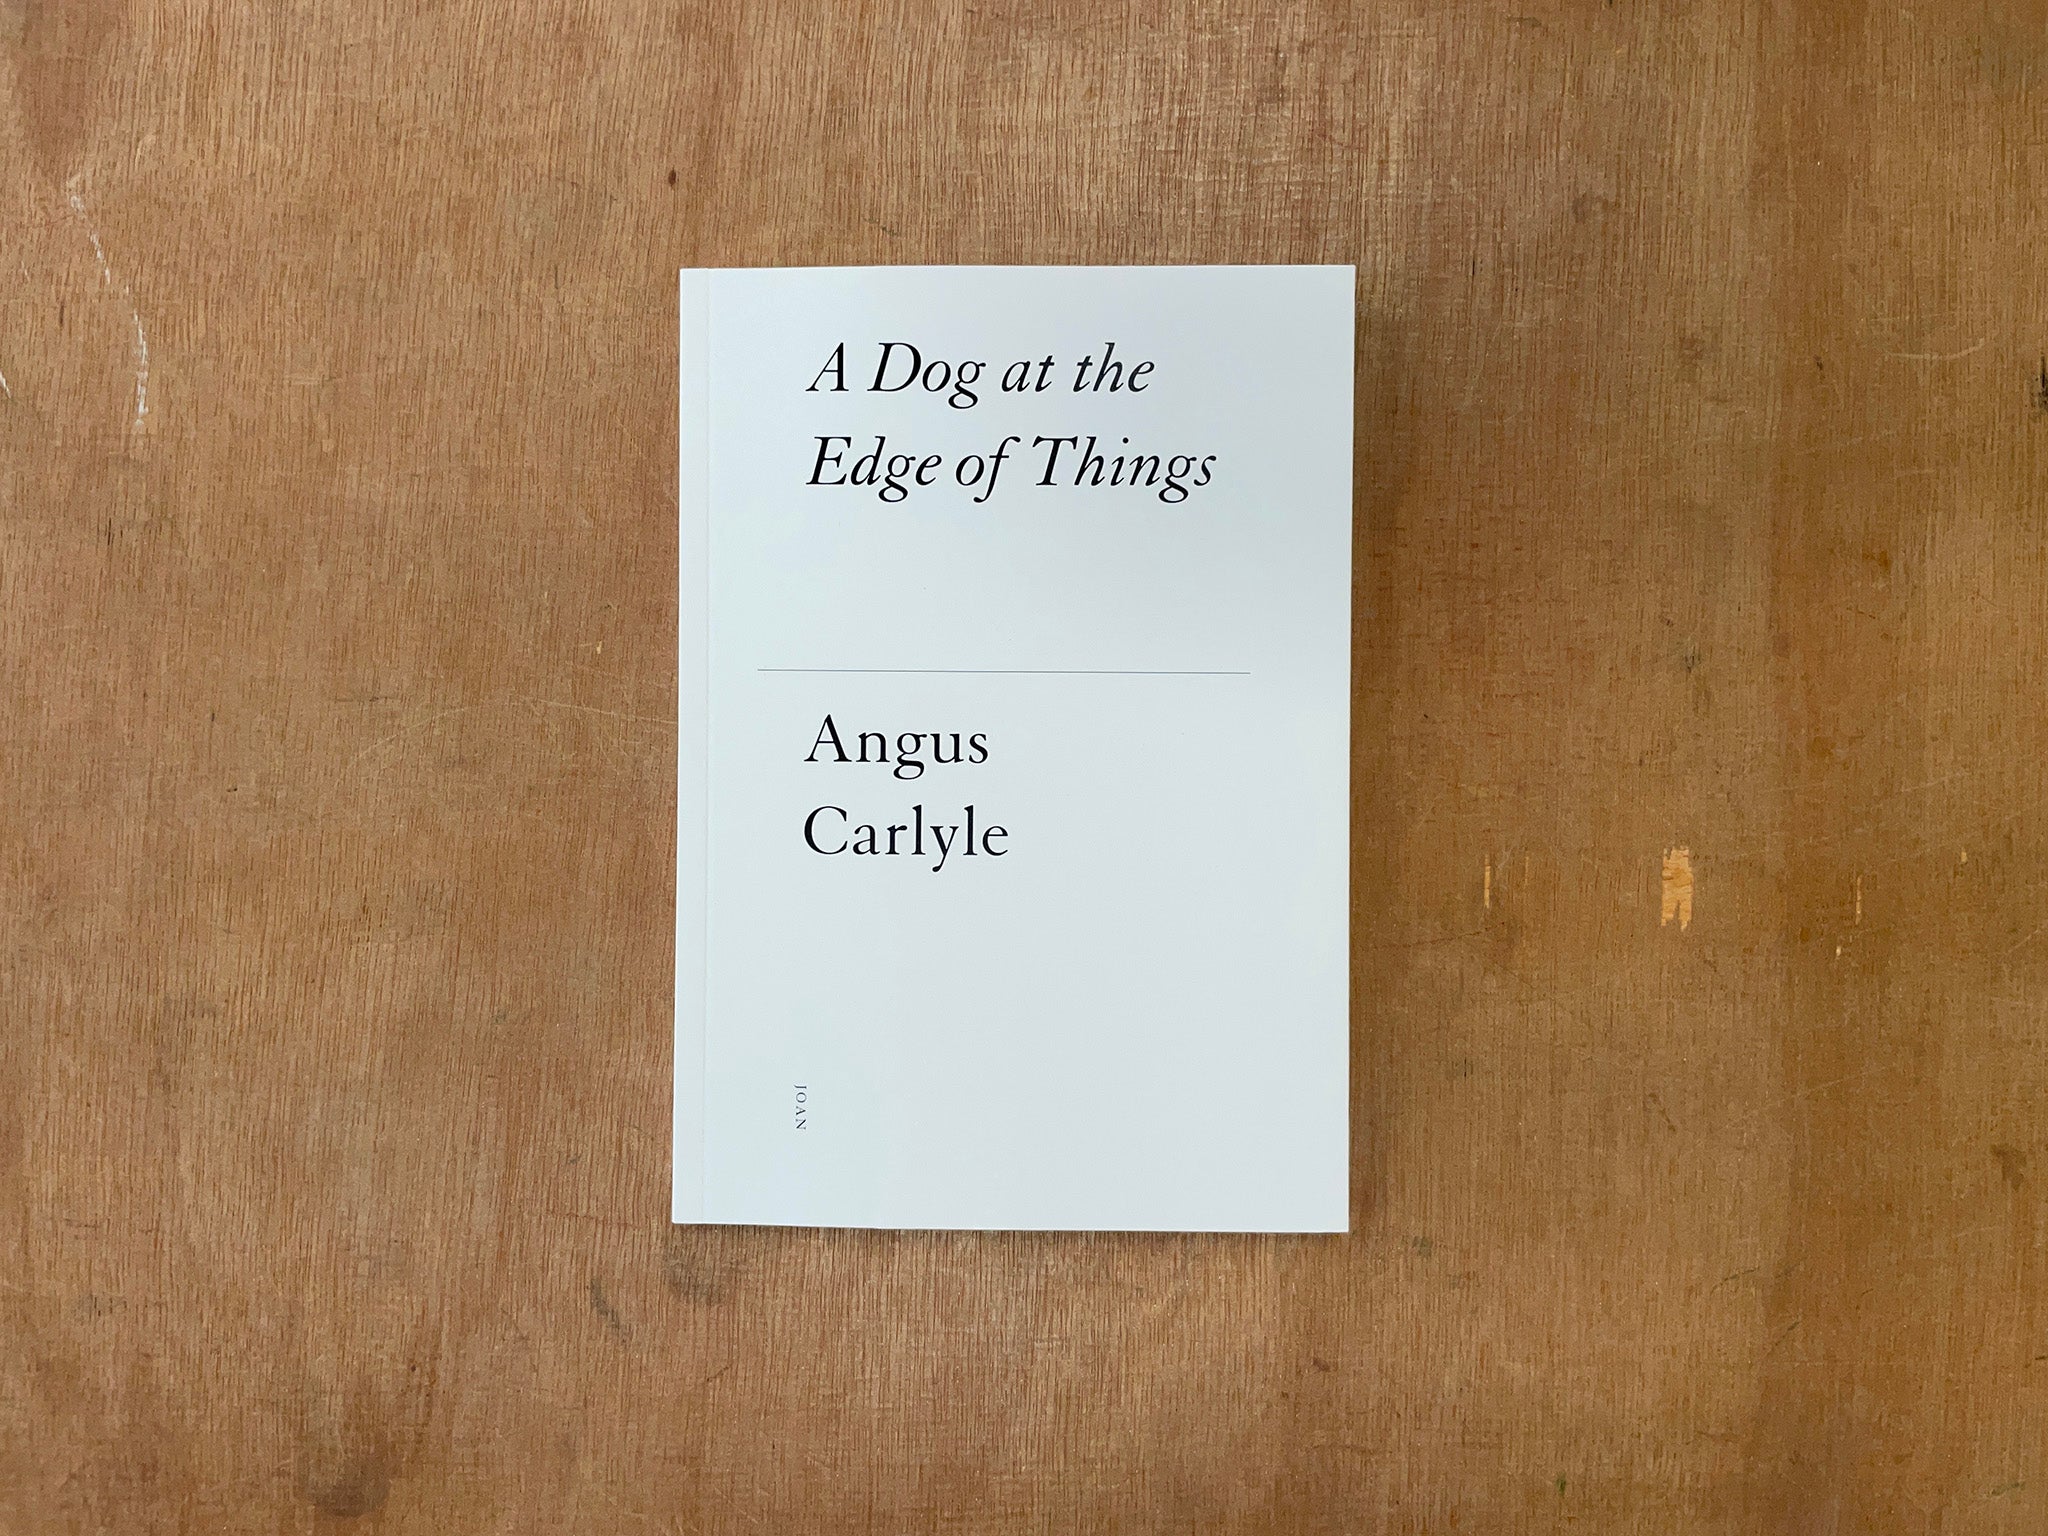 A DOG AT THE EDGE OF THINGS by Angus Carlyle